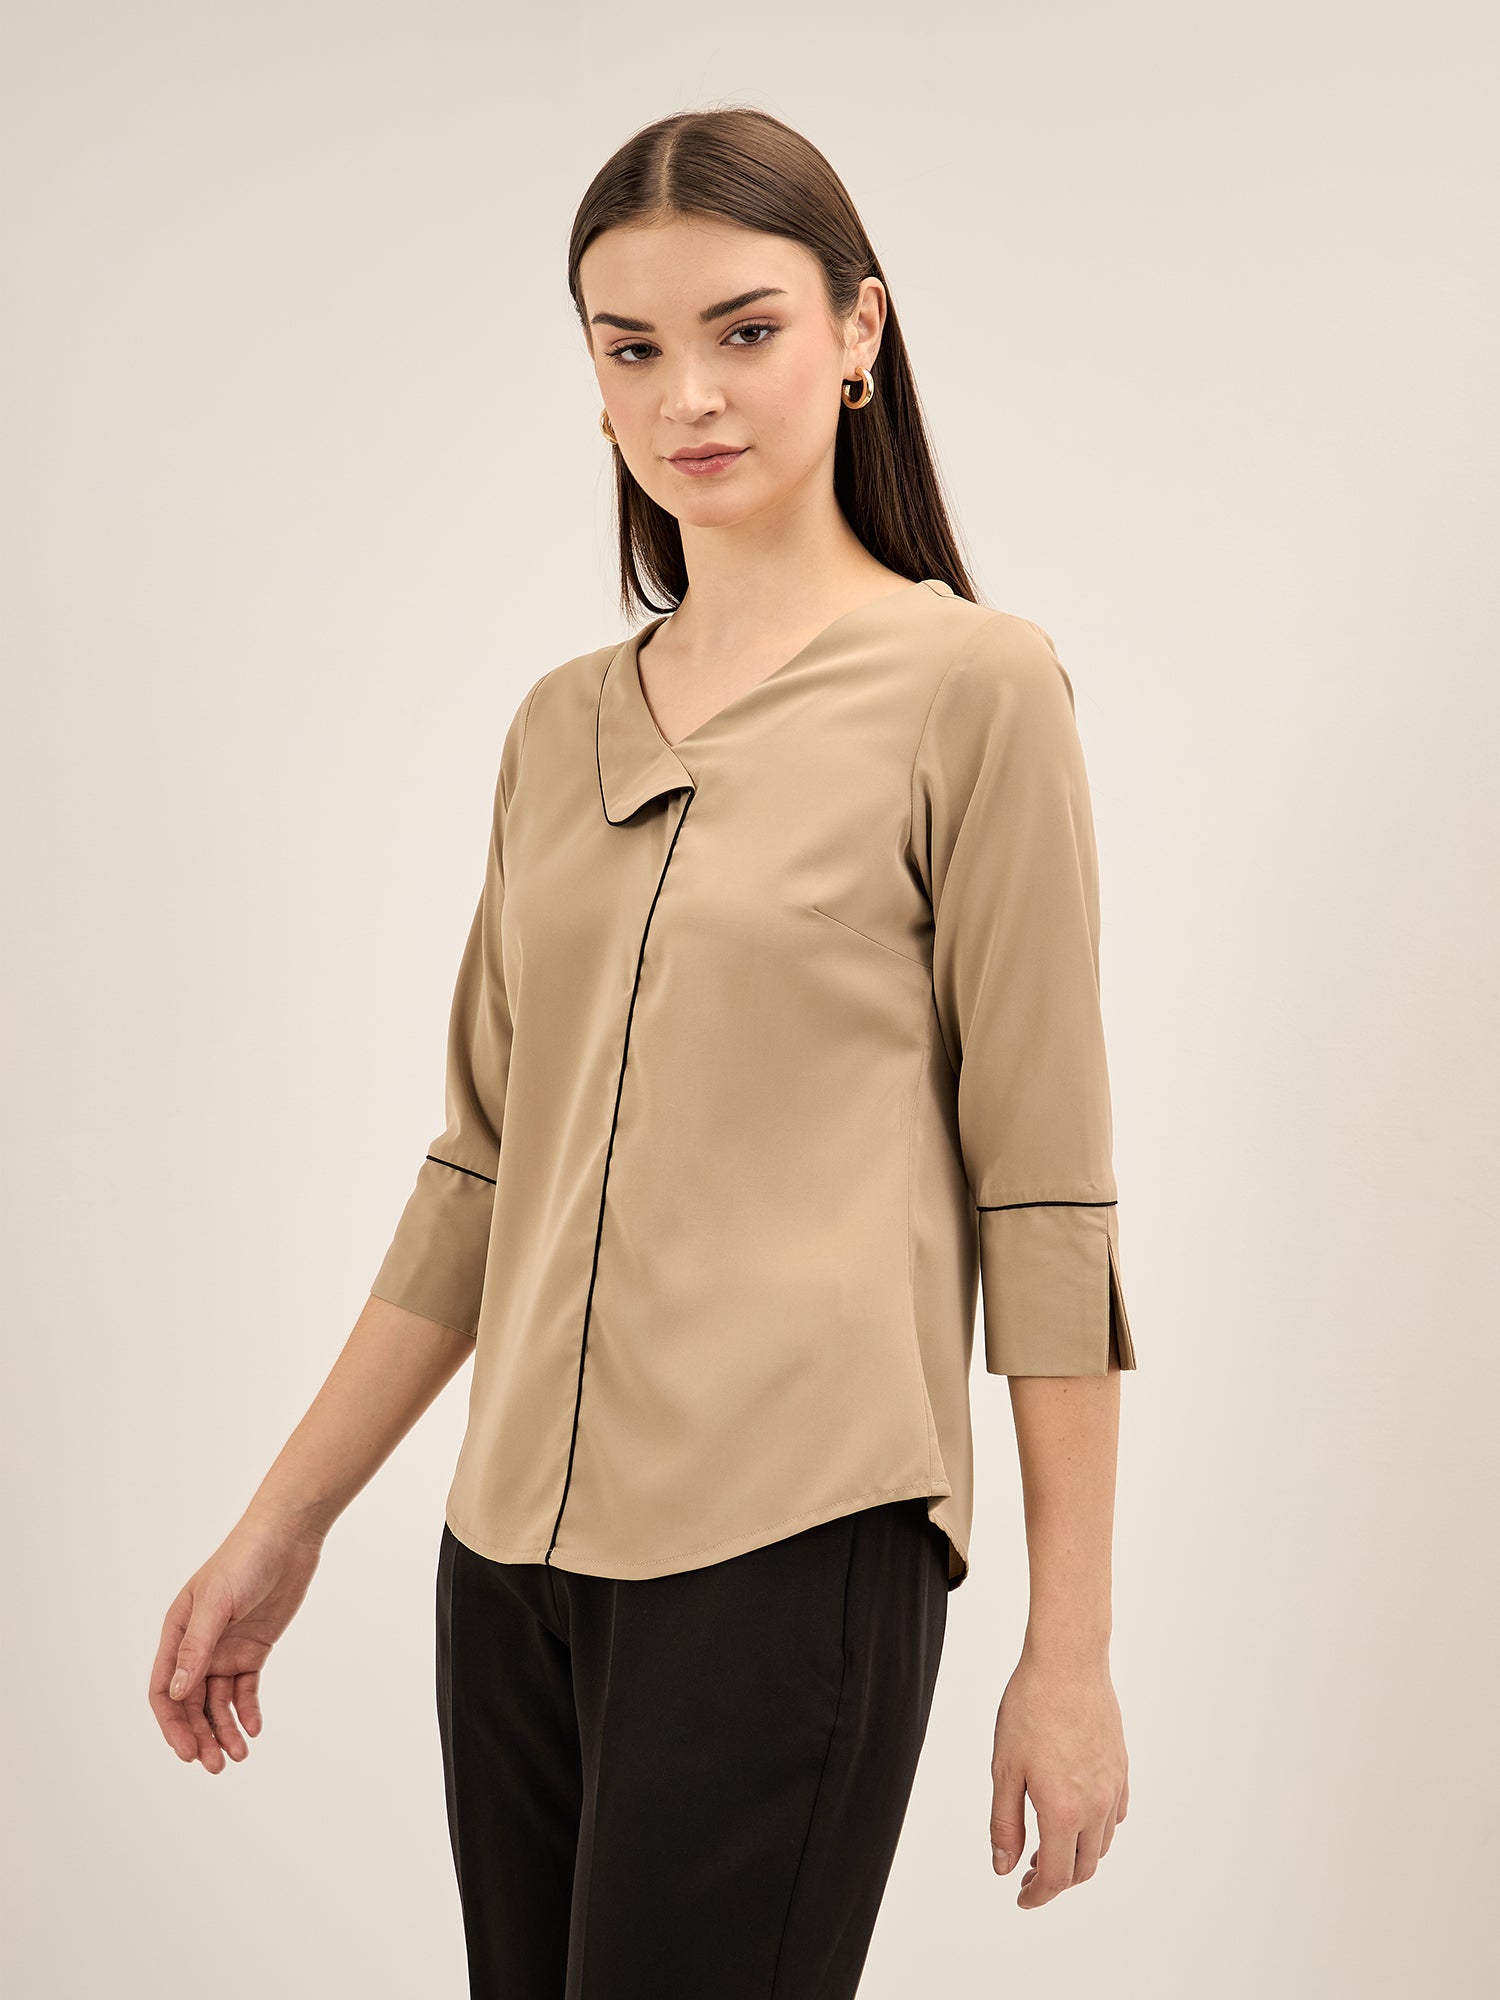 Moonbeam Contrast Piping Top - Taupe & Black